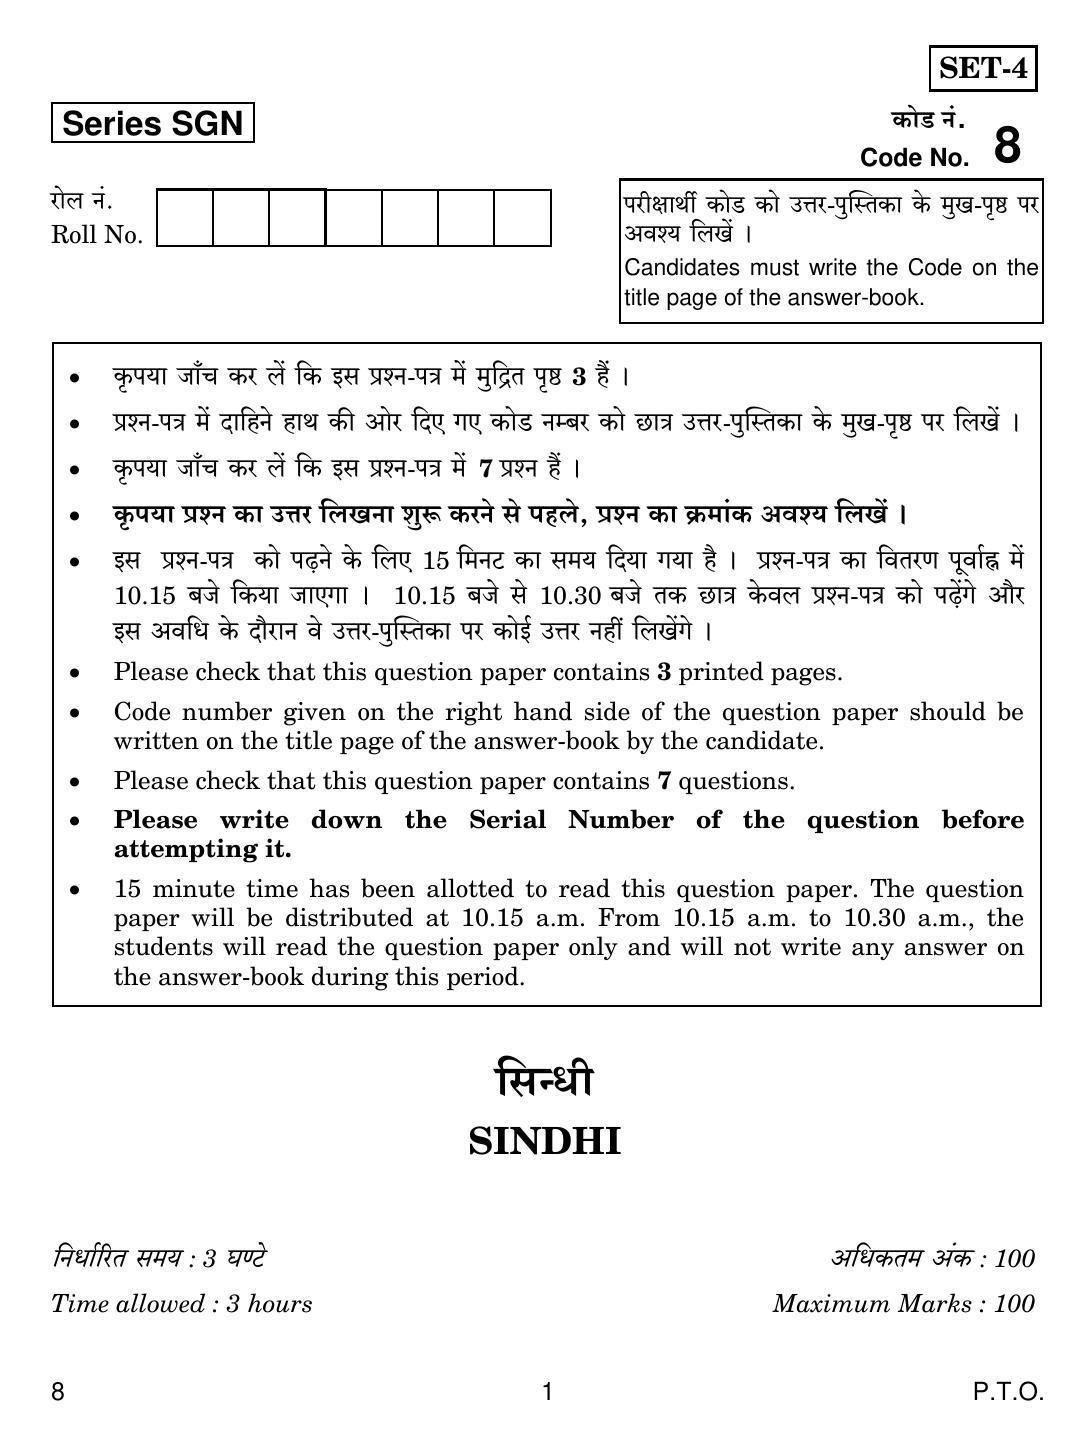 CBSE Class 12 8 SINDHI 2018 Question Paper - Page 1